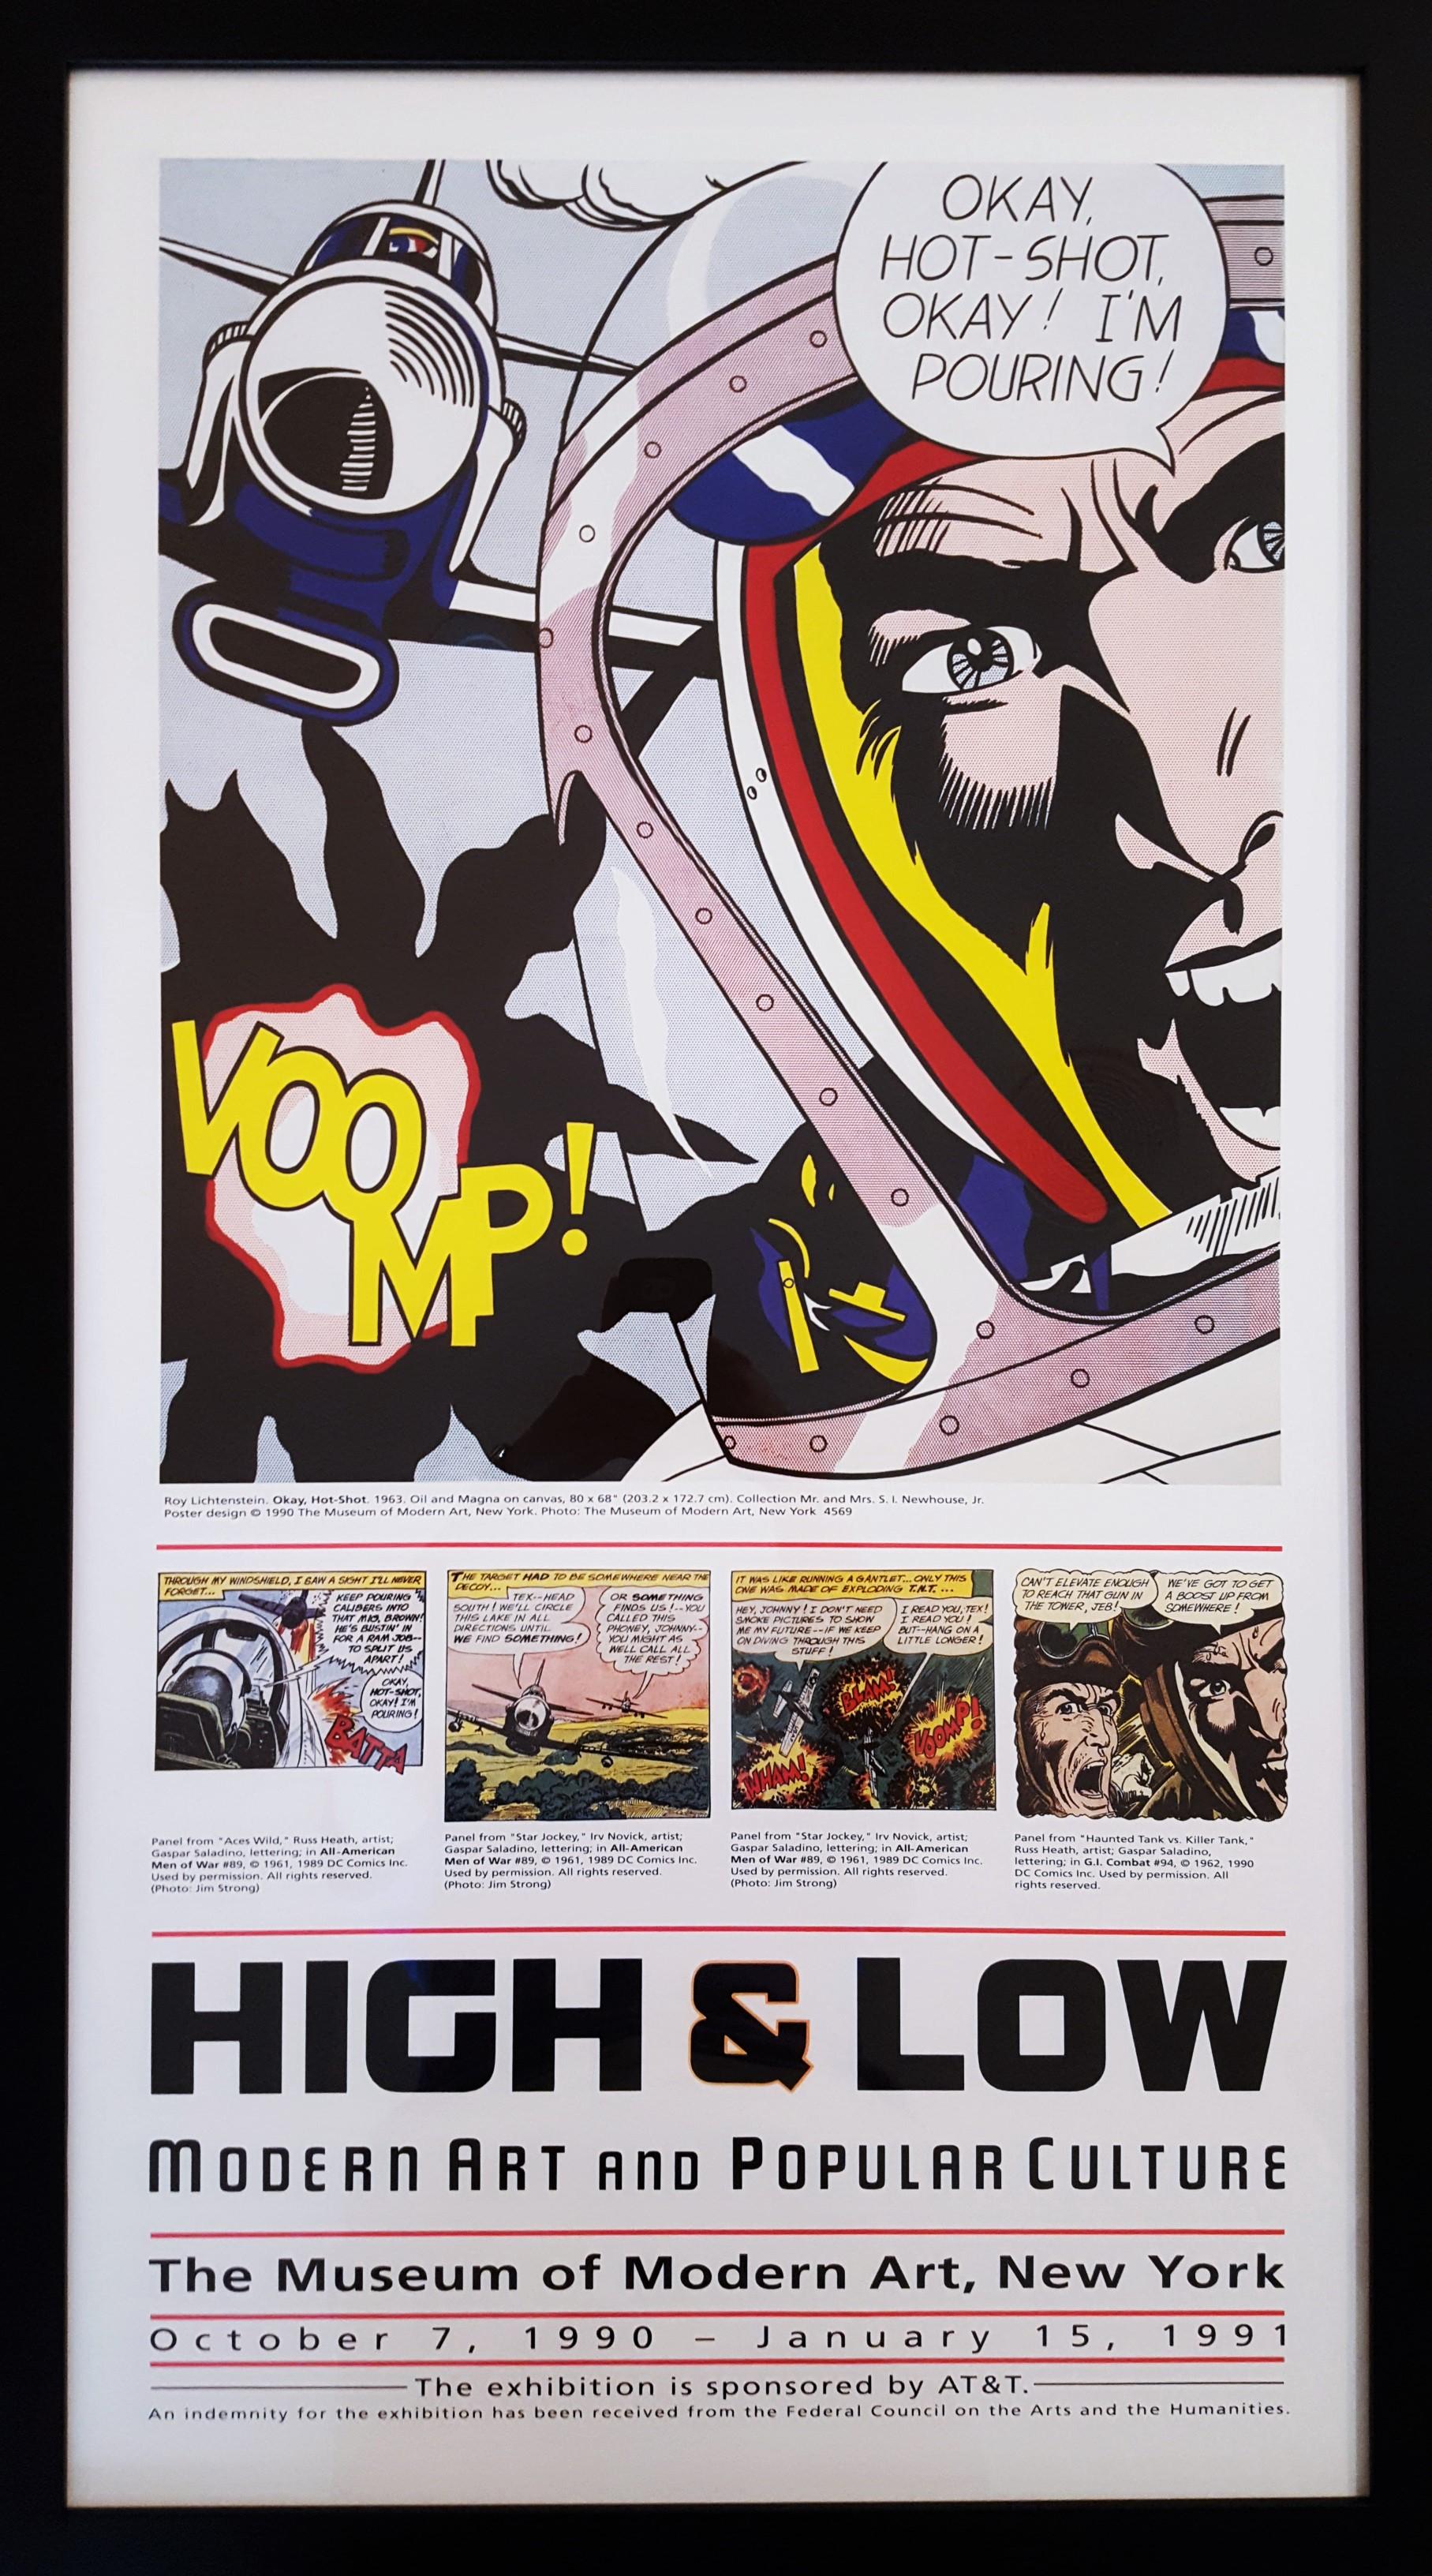 High & Low. Modern Art and Popular Culture (MoMA) - Print by Roy Lichtenstein